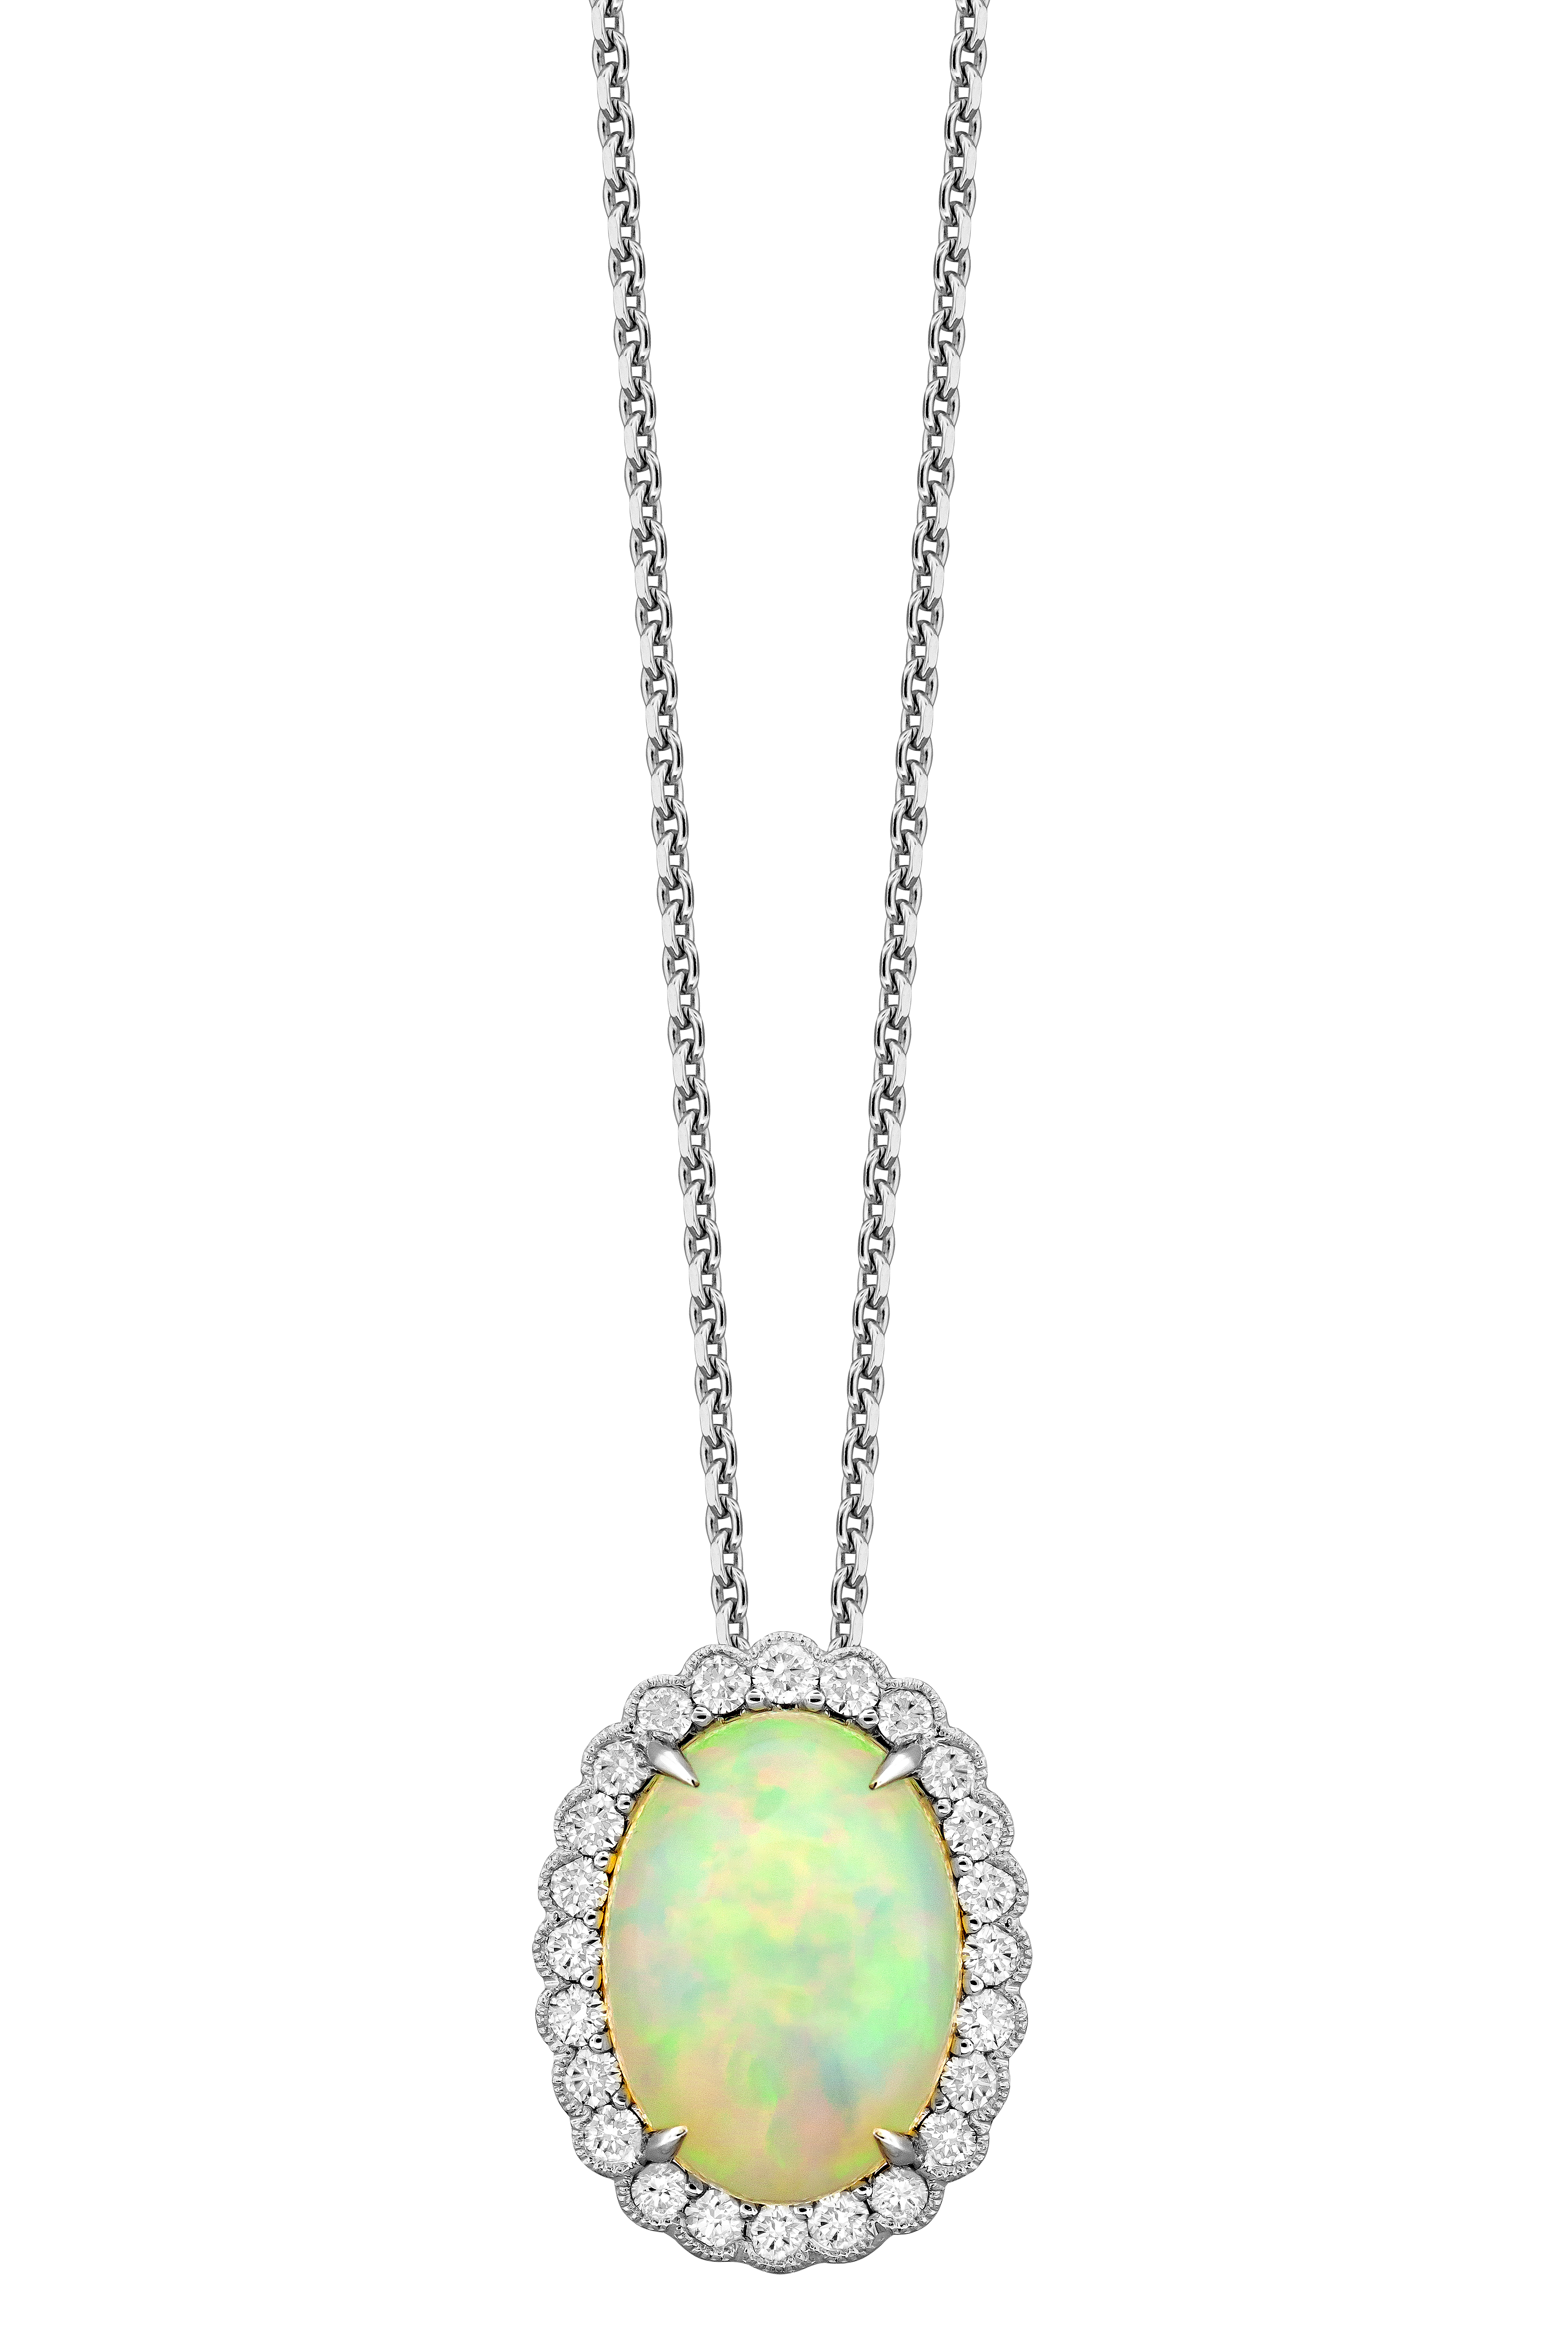 16" 3.57ctOP .48ctw FG VS 18KW Diamond Halo Ethiopian Oval Cabachon Opal on cable chain with trigger lobster clasp by Spark Creations